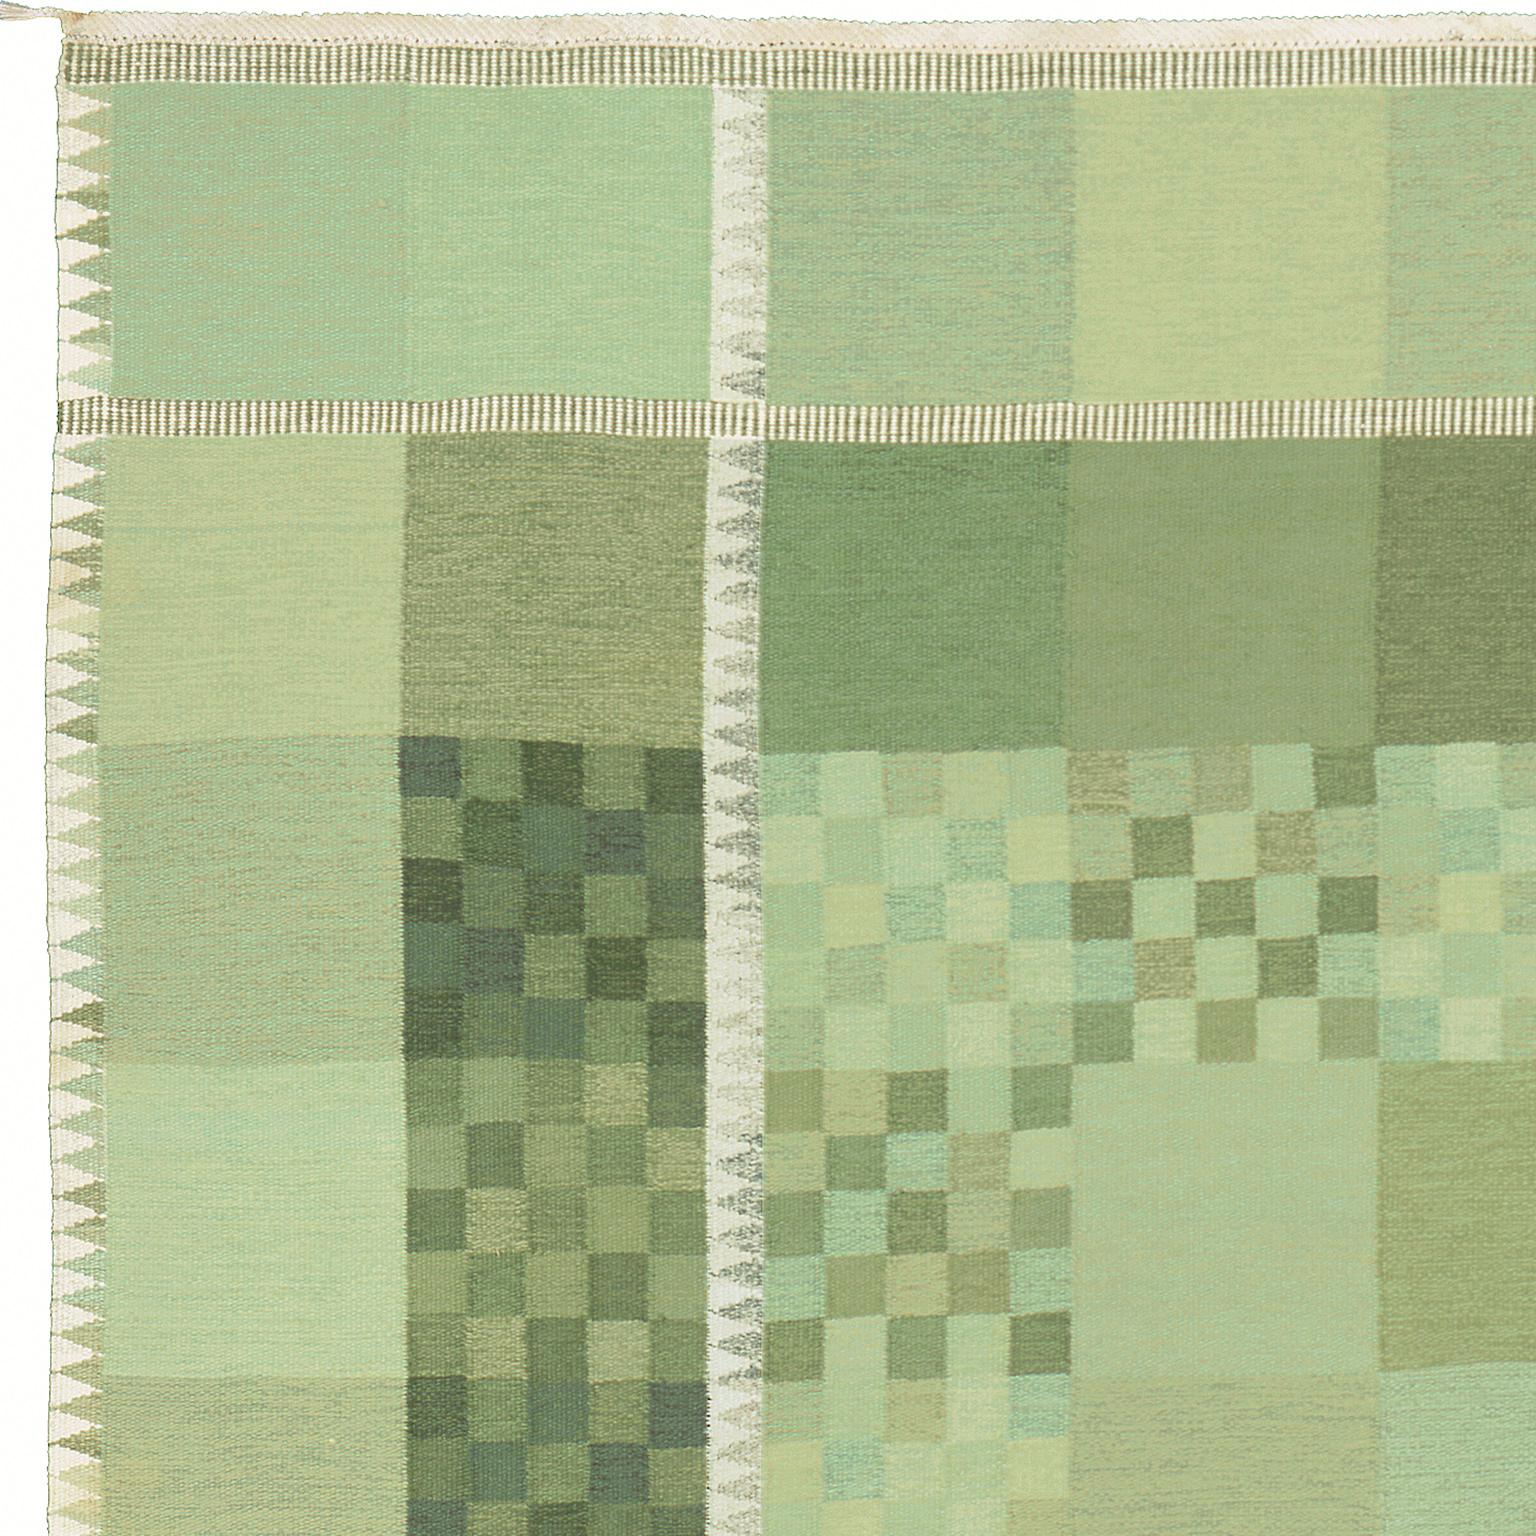 Mid 20th Century Swedish Flat Weave Rug by Ingrid Dessau In Good Condition For Sale In New York, NY